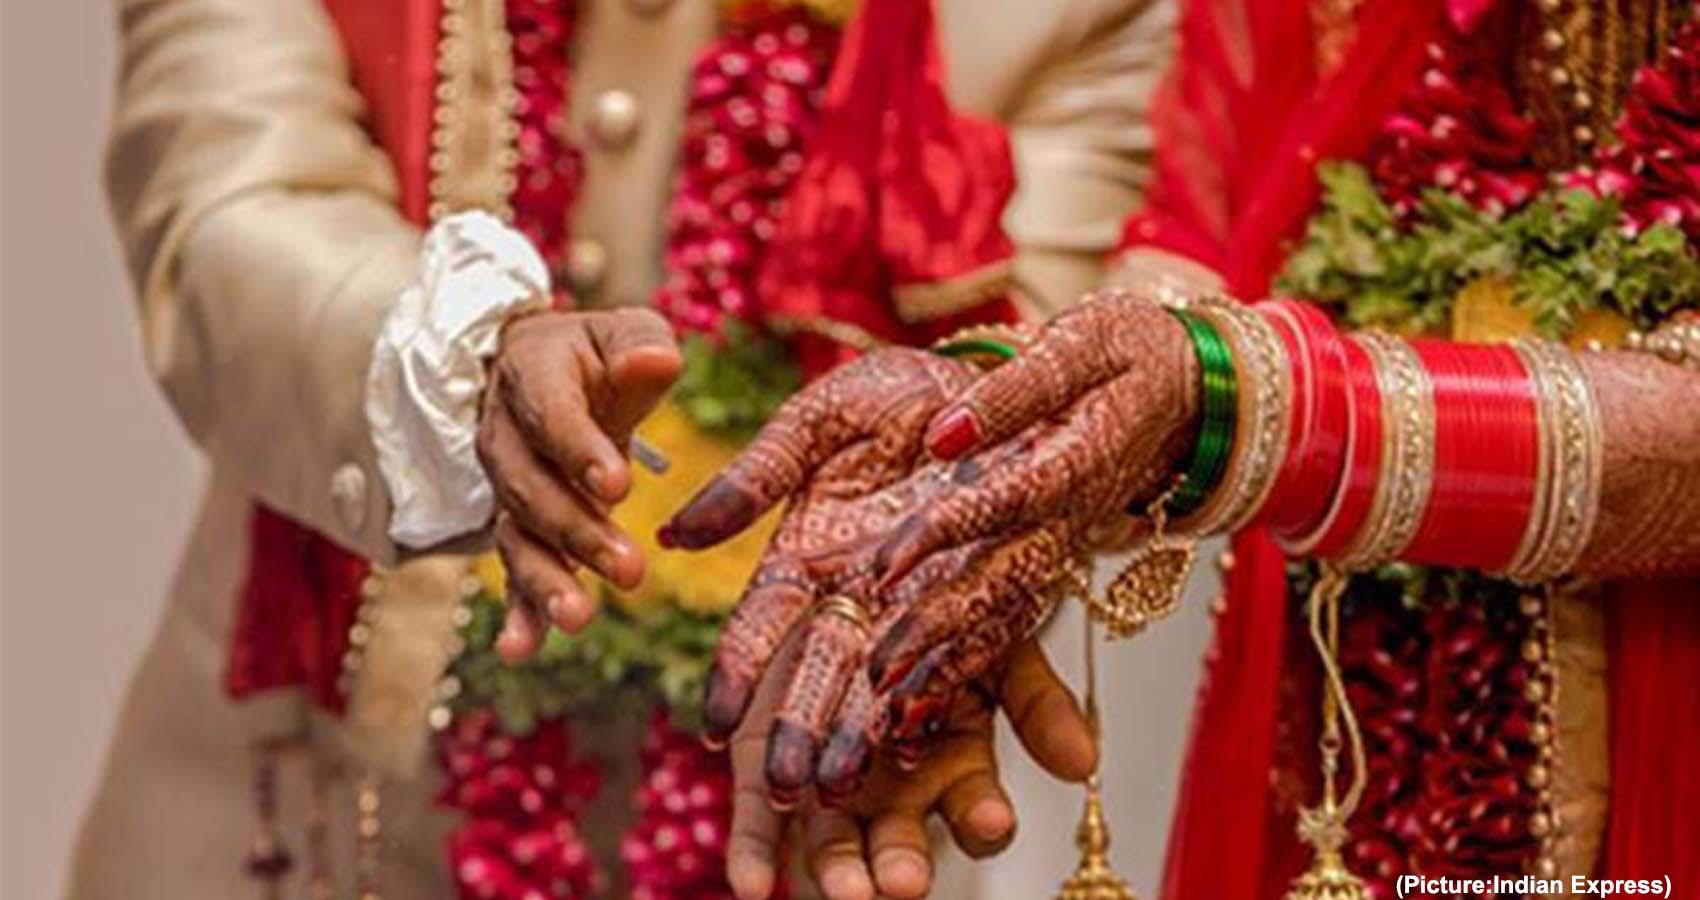 India To Raise Marriage Age For Women To 21